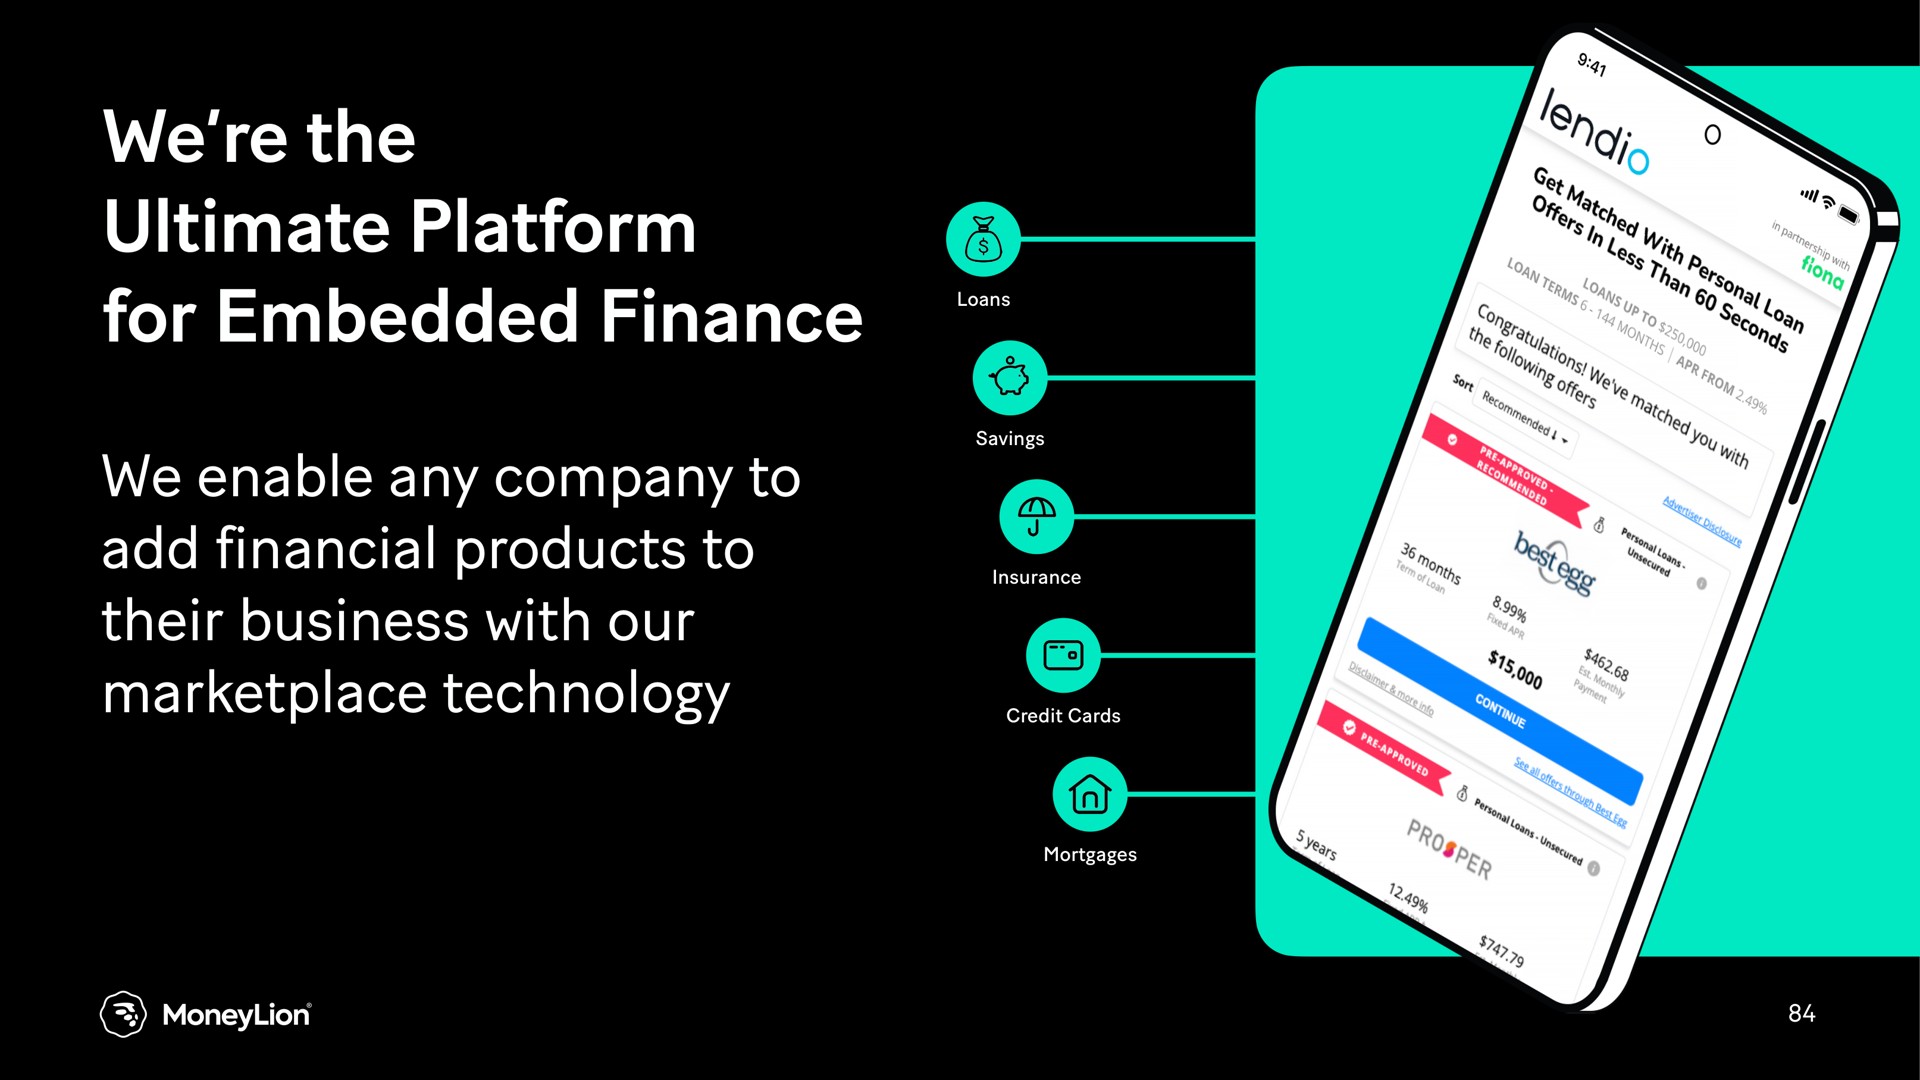 we the ultimate platform for embedded finance we enable any company to add financial products to their business with our technology | MoneyLion